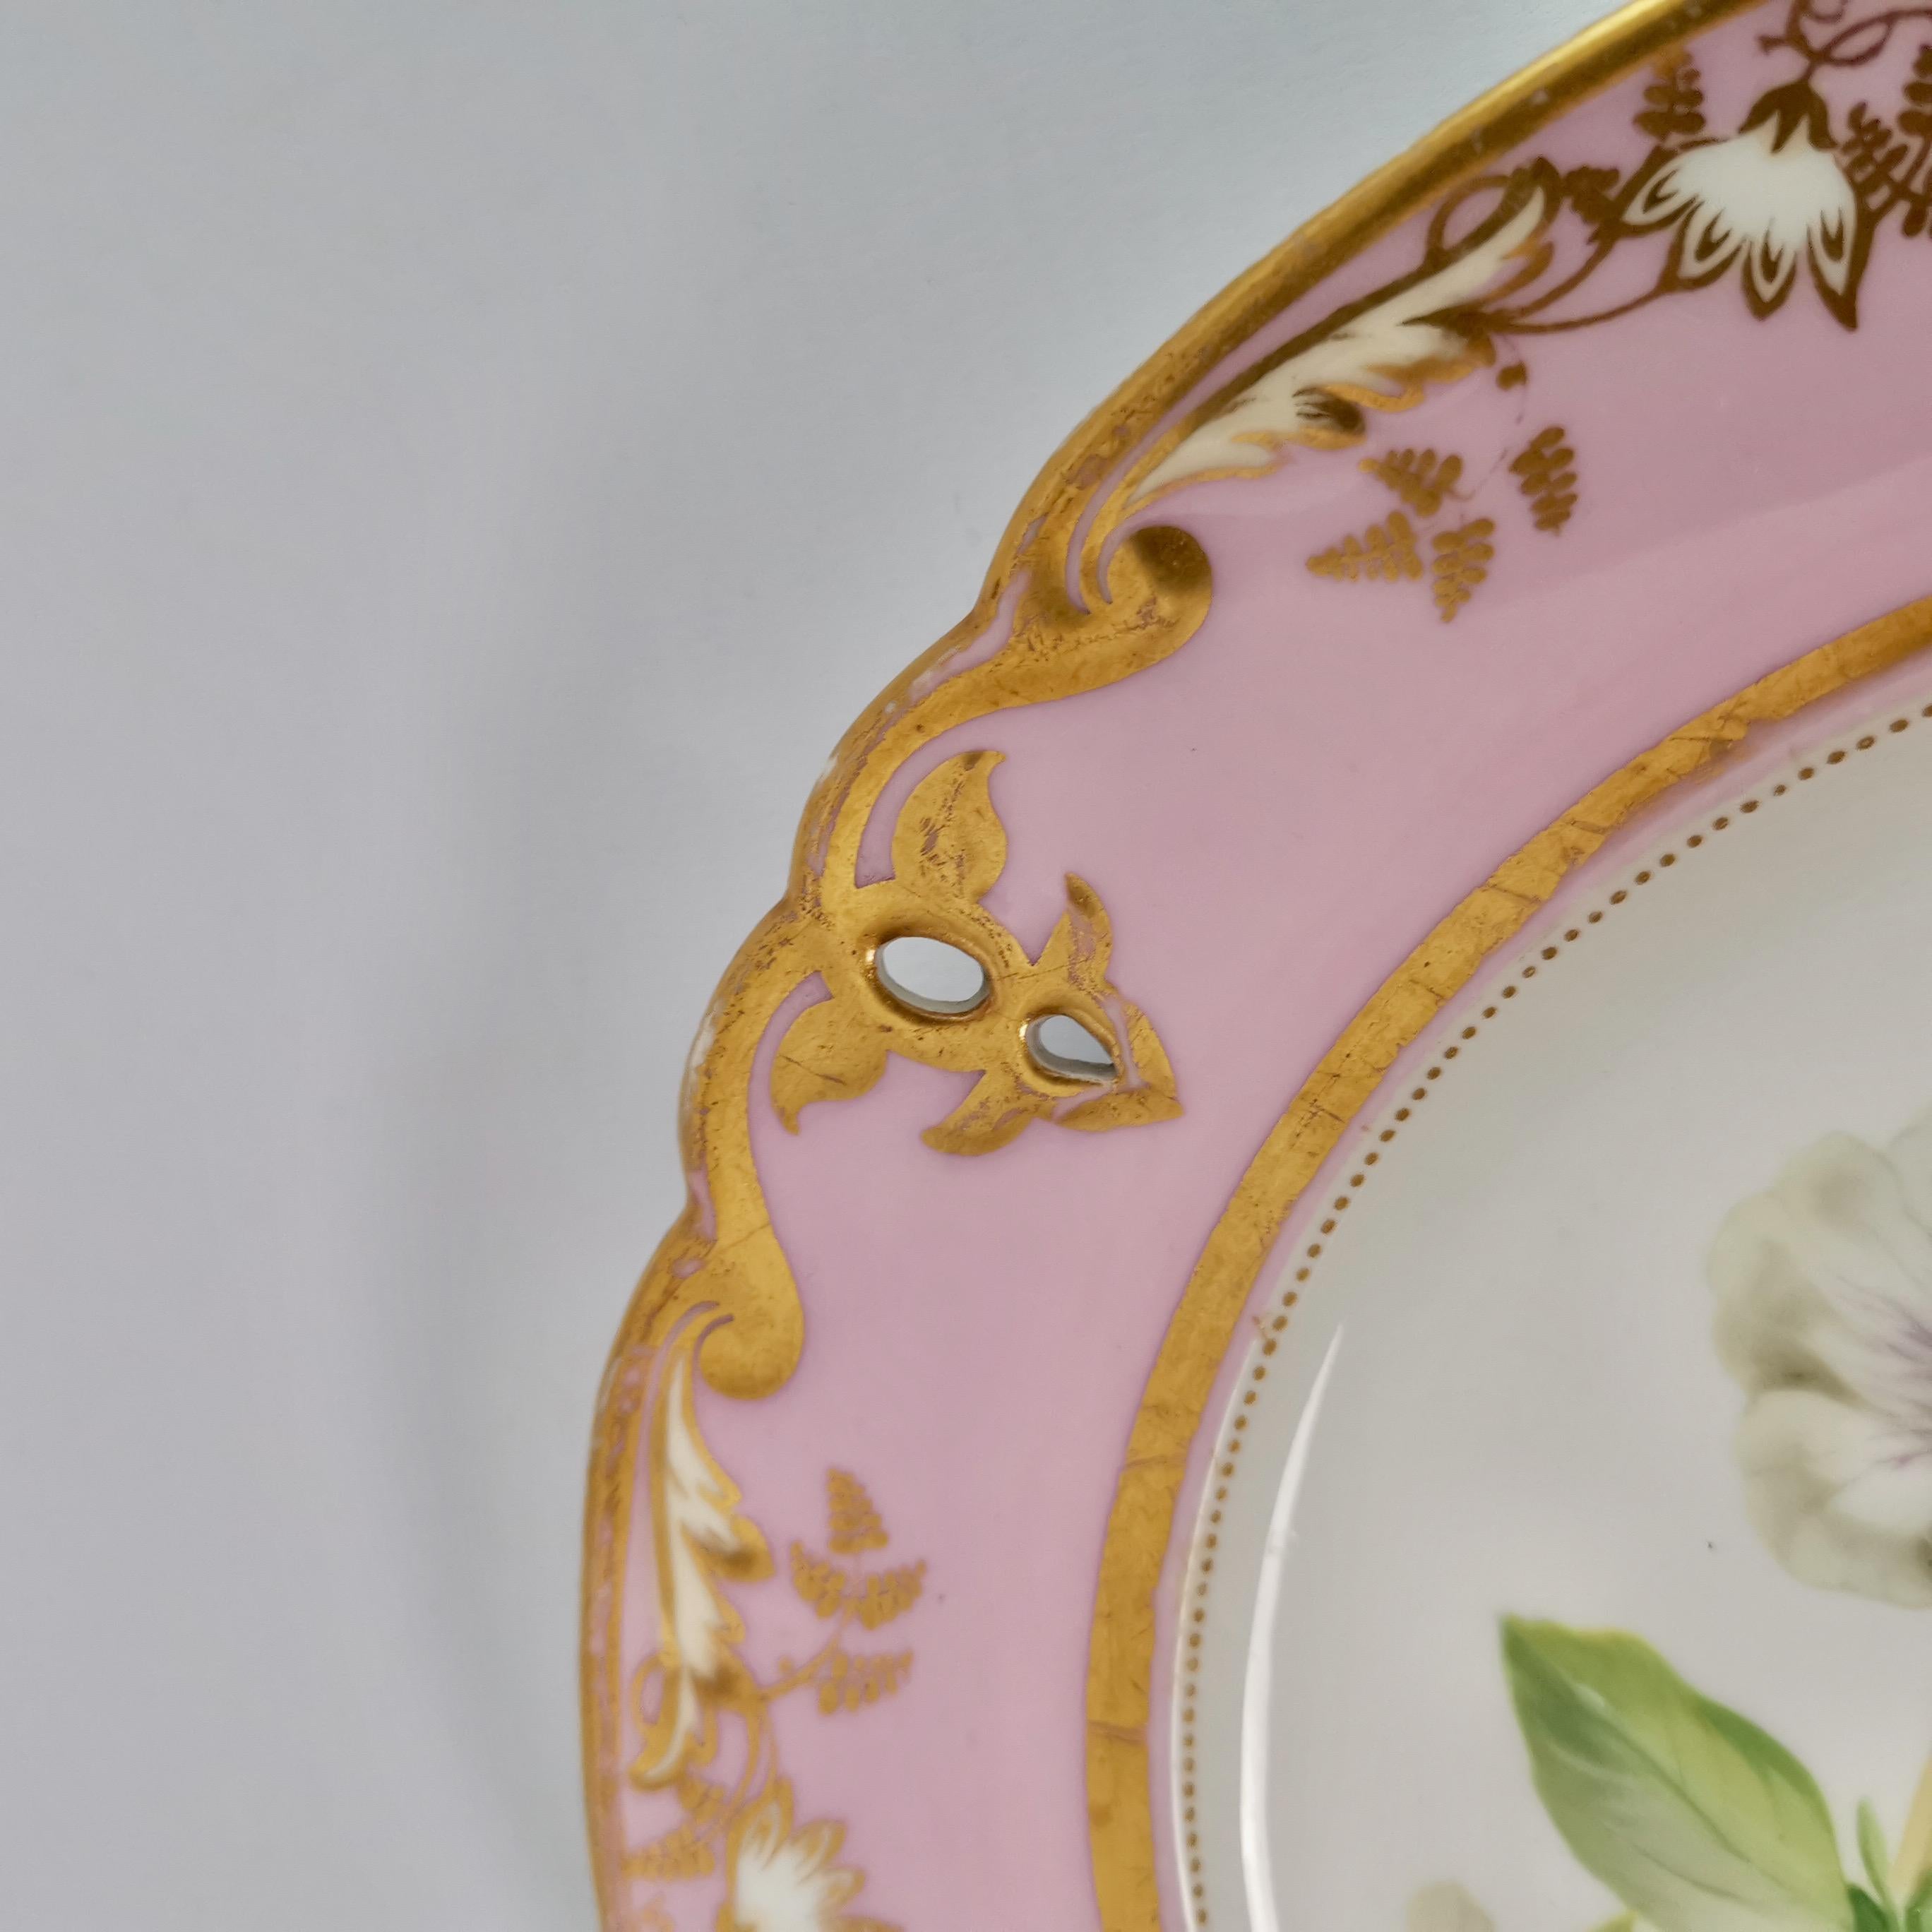 Samuel Alcock Porcelain Plate, Pink with White Achimenes, circa 1852 '1' 6